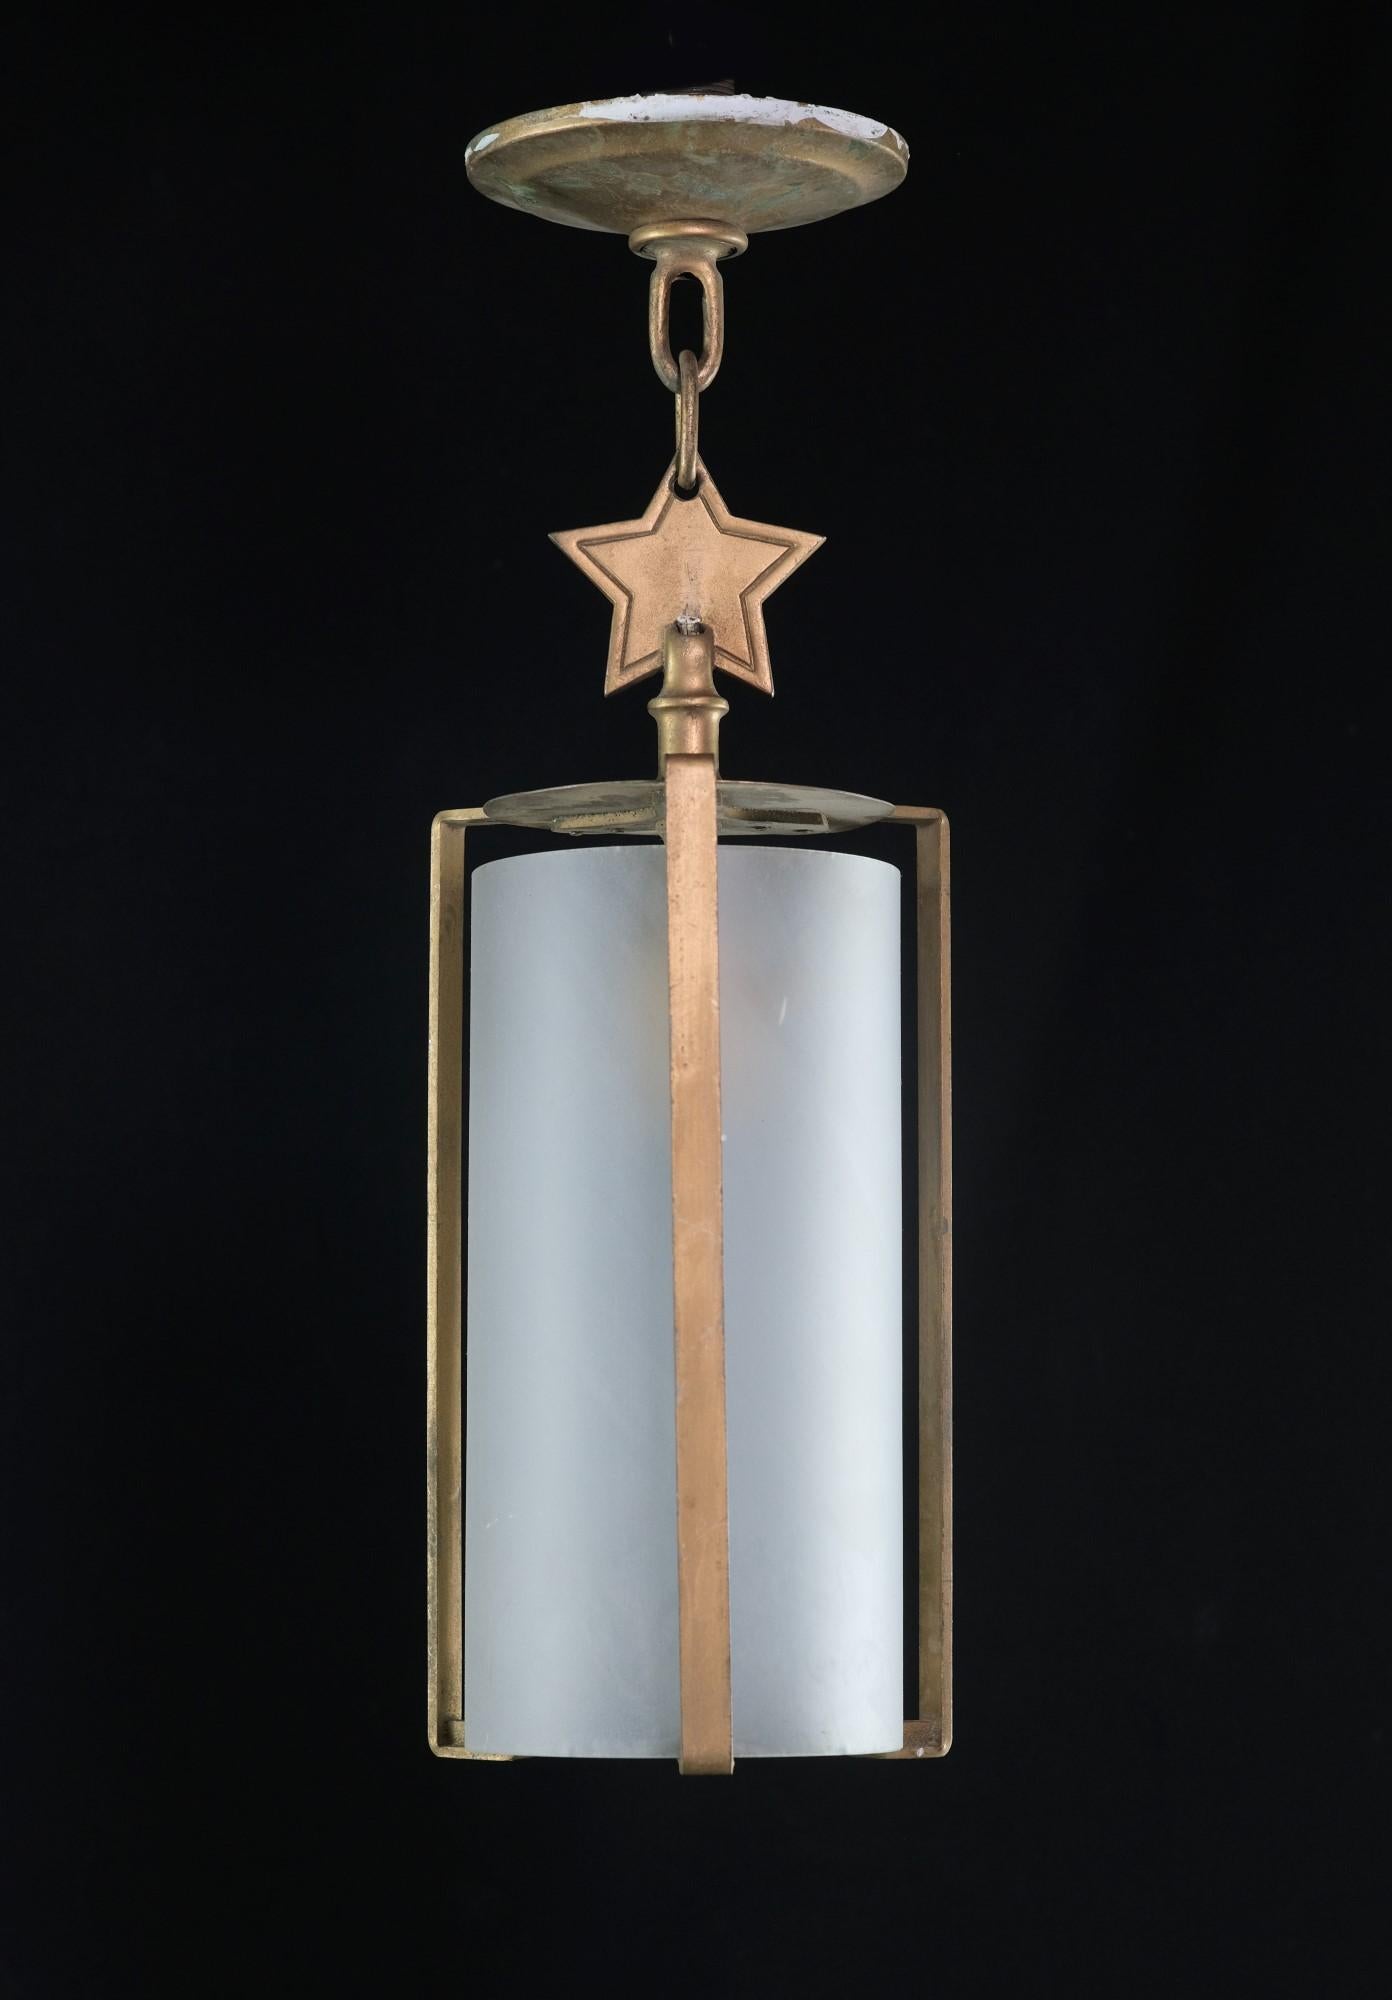 Mid-Century Modern pendant light lantern. Frame is bronze with a simple star detail. The frosted cylinder etched glass shade is original. The chain can be lengthened upon request. Cleaned and rewired. Small quantity available at time of posting.